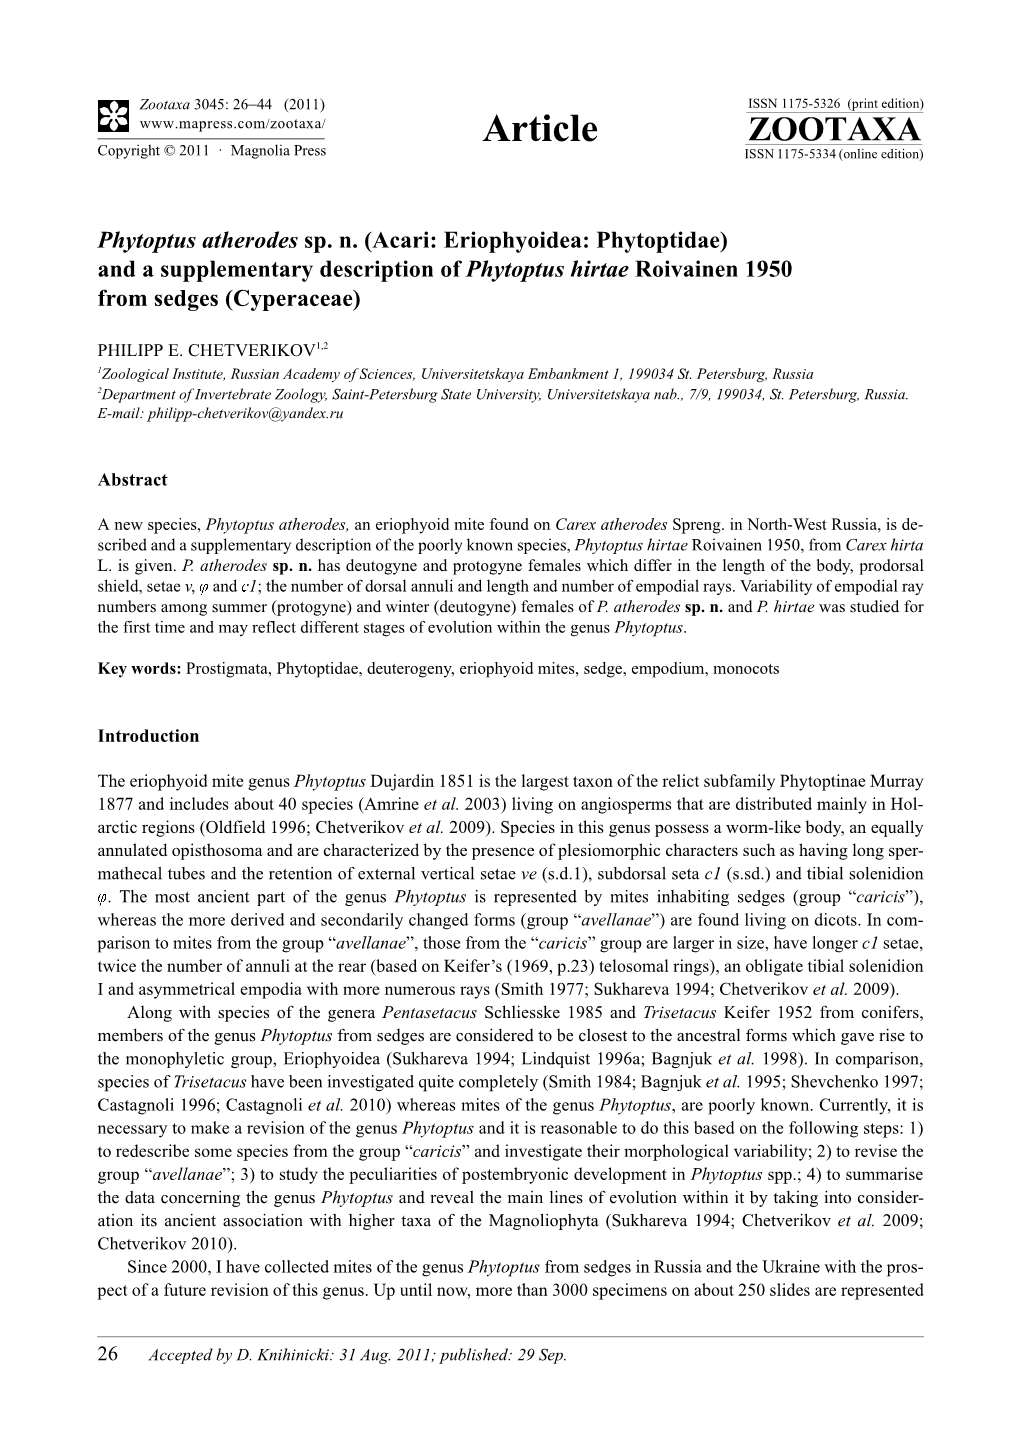 Phytoptus Atherodes Sp. N. (Acari: Eriophyoidea: Phytoptidae) and a Supplementary Description of Phytoptus Hirtae Roivainen 1950 from Sedges (Cyperaceae)